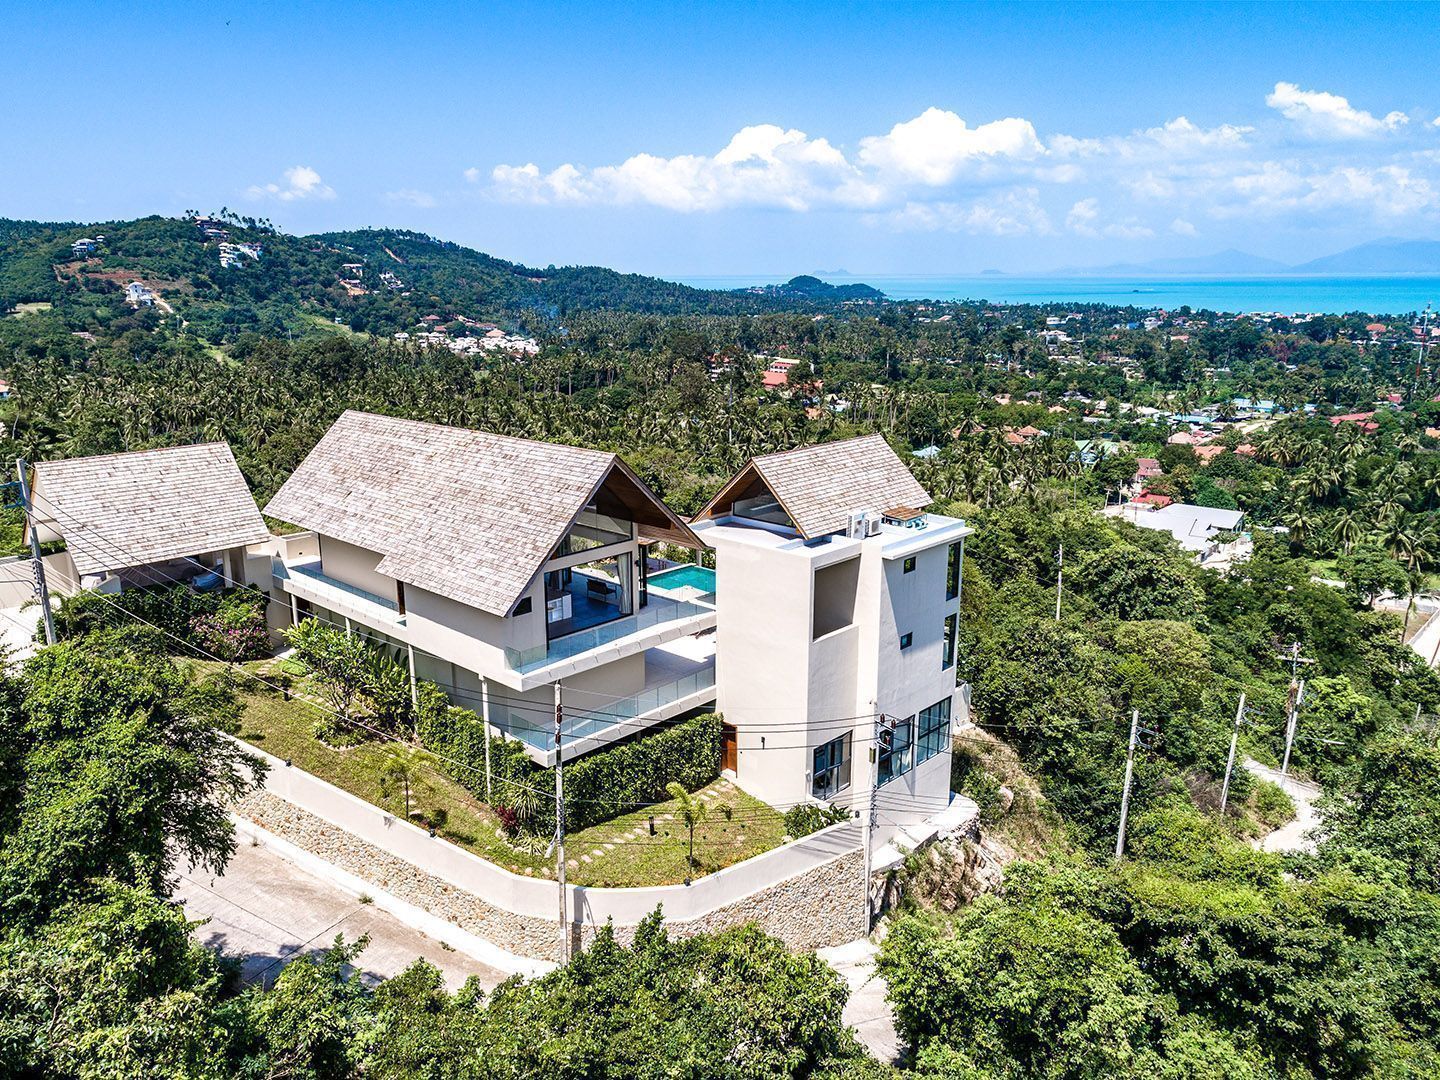 6 bedrooms luxurious panoramic sea view Villa in Bophut: 6 bedrooms luxurious panoramic sea view Villa in Bophut for sale